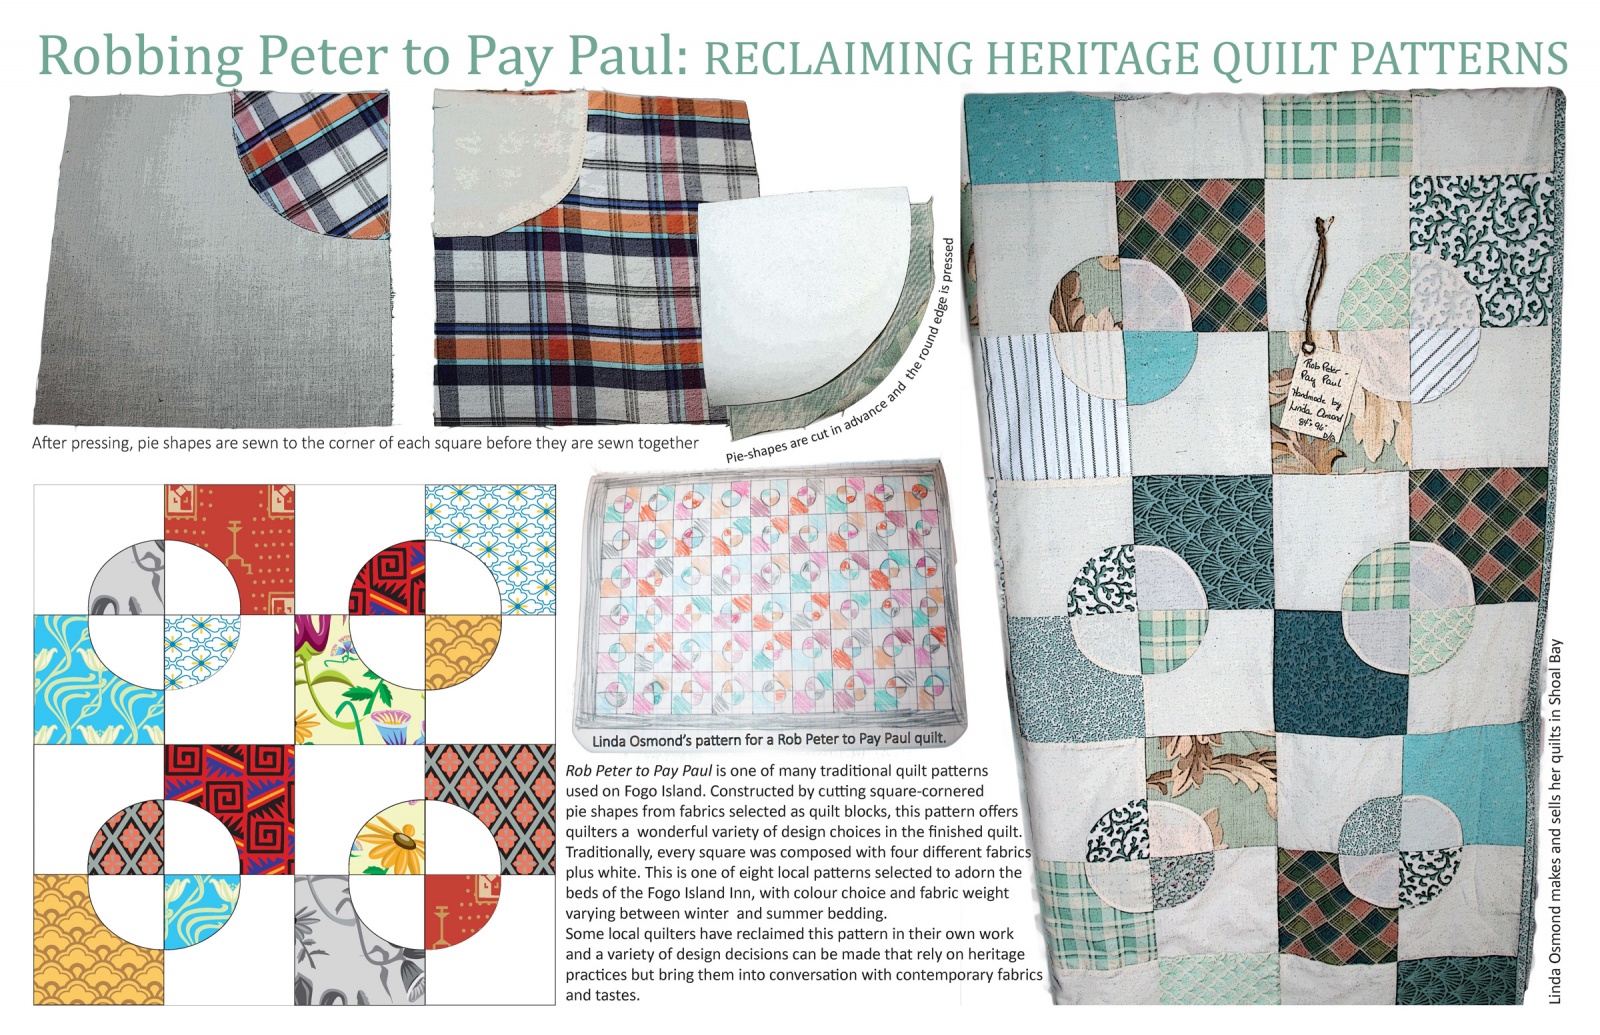 Robbing Peter to Pay Paul: Reclaiming Heritage Quilt Patterns